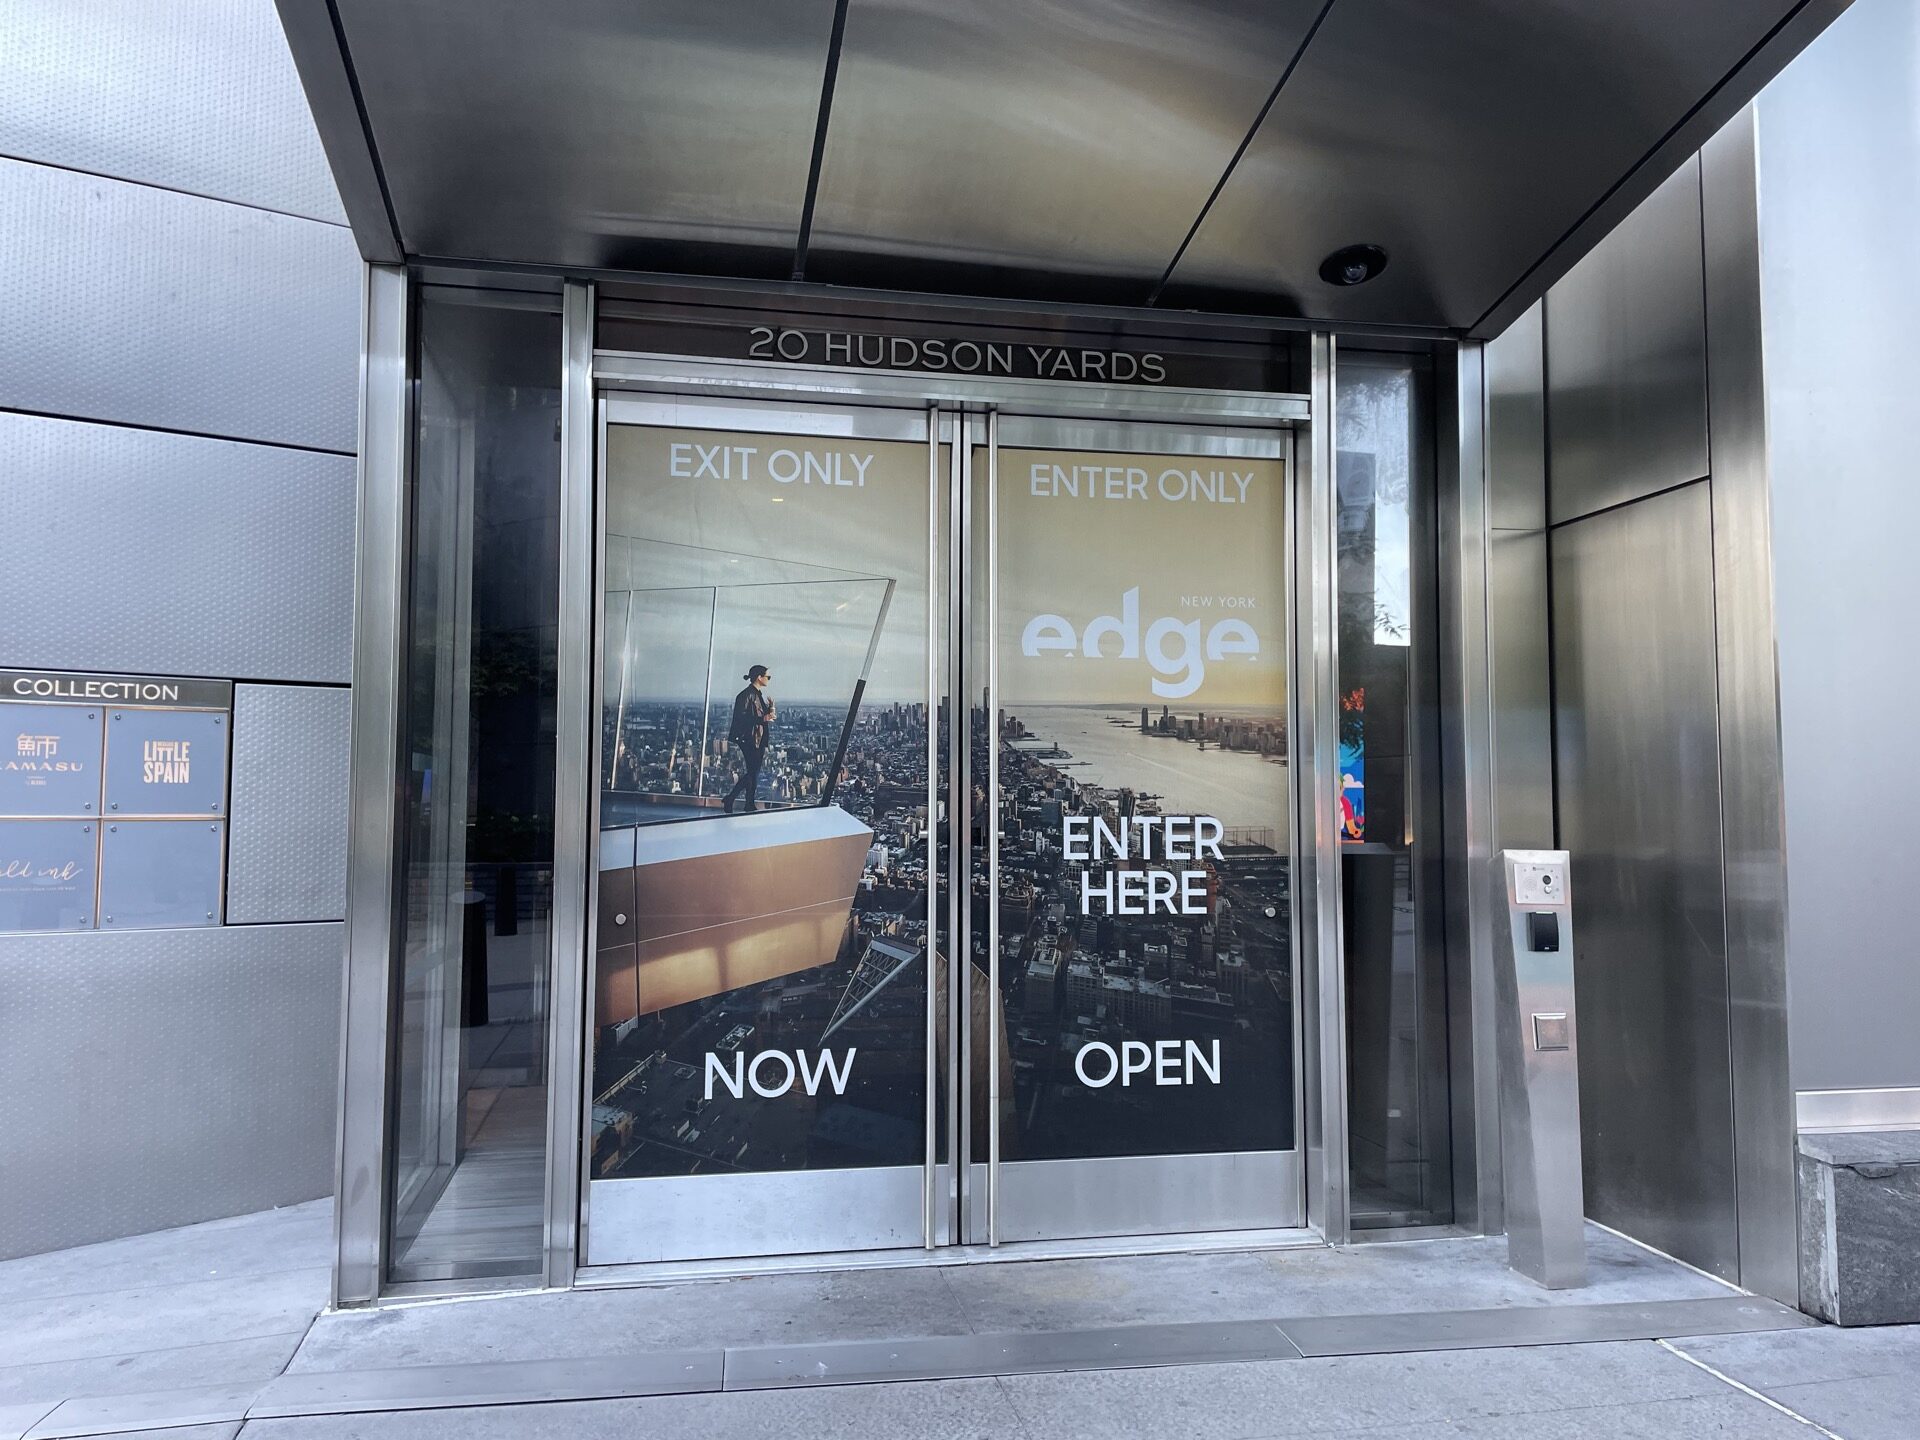 A photo of the ground entrance to Edge with 20 Hudson Yards as the address